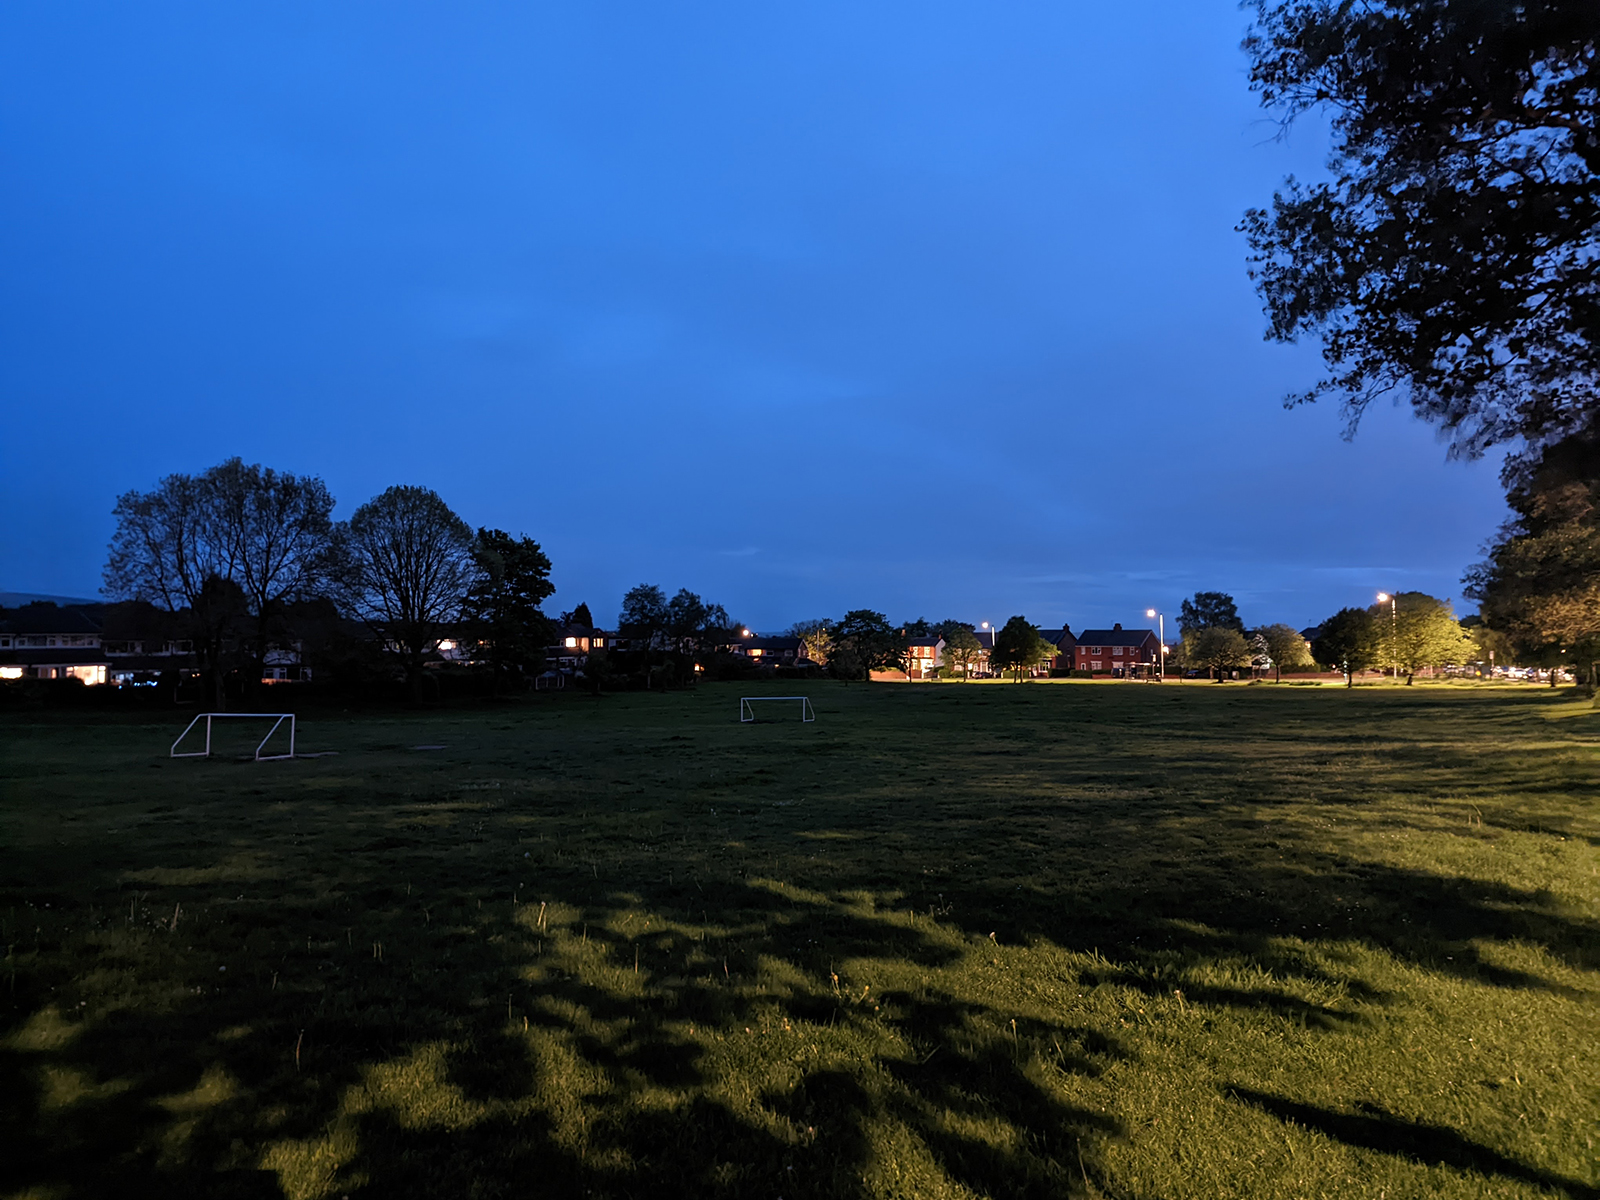 Samsung Galaxy A13 camera sample showing a park at night (Google Pixel 6 Pro comparison)